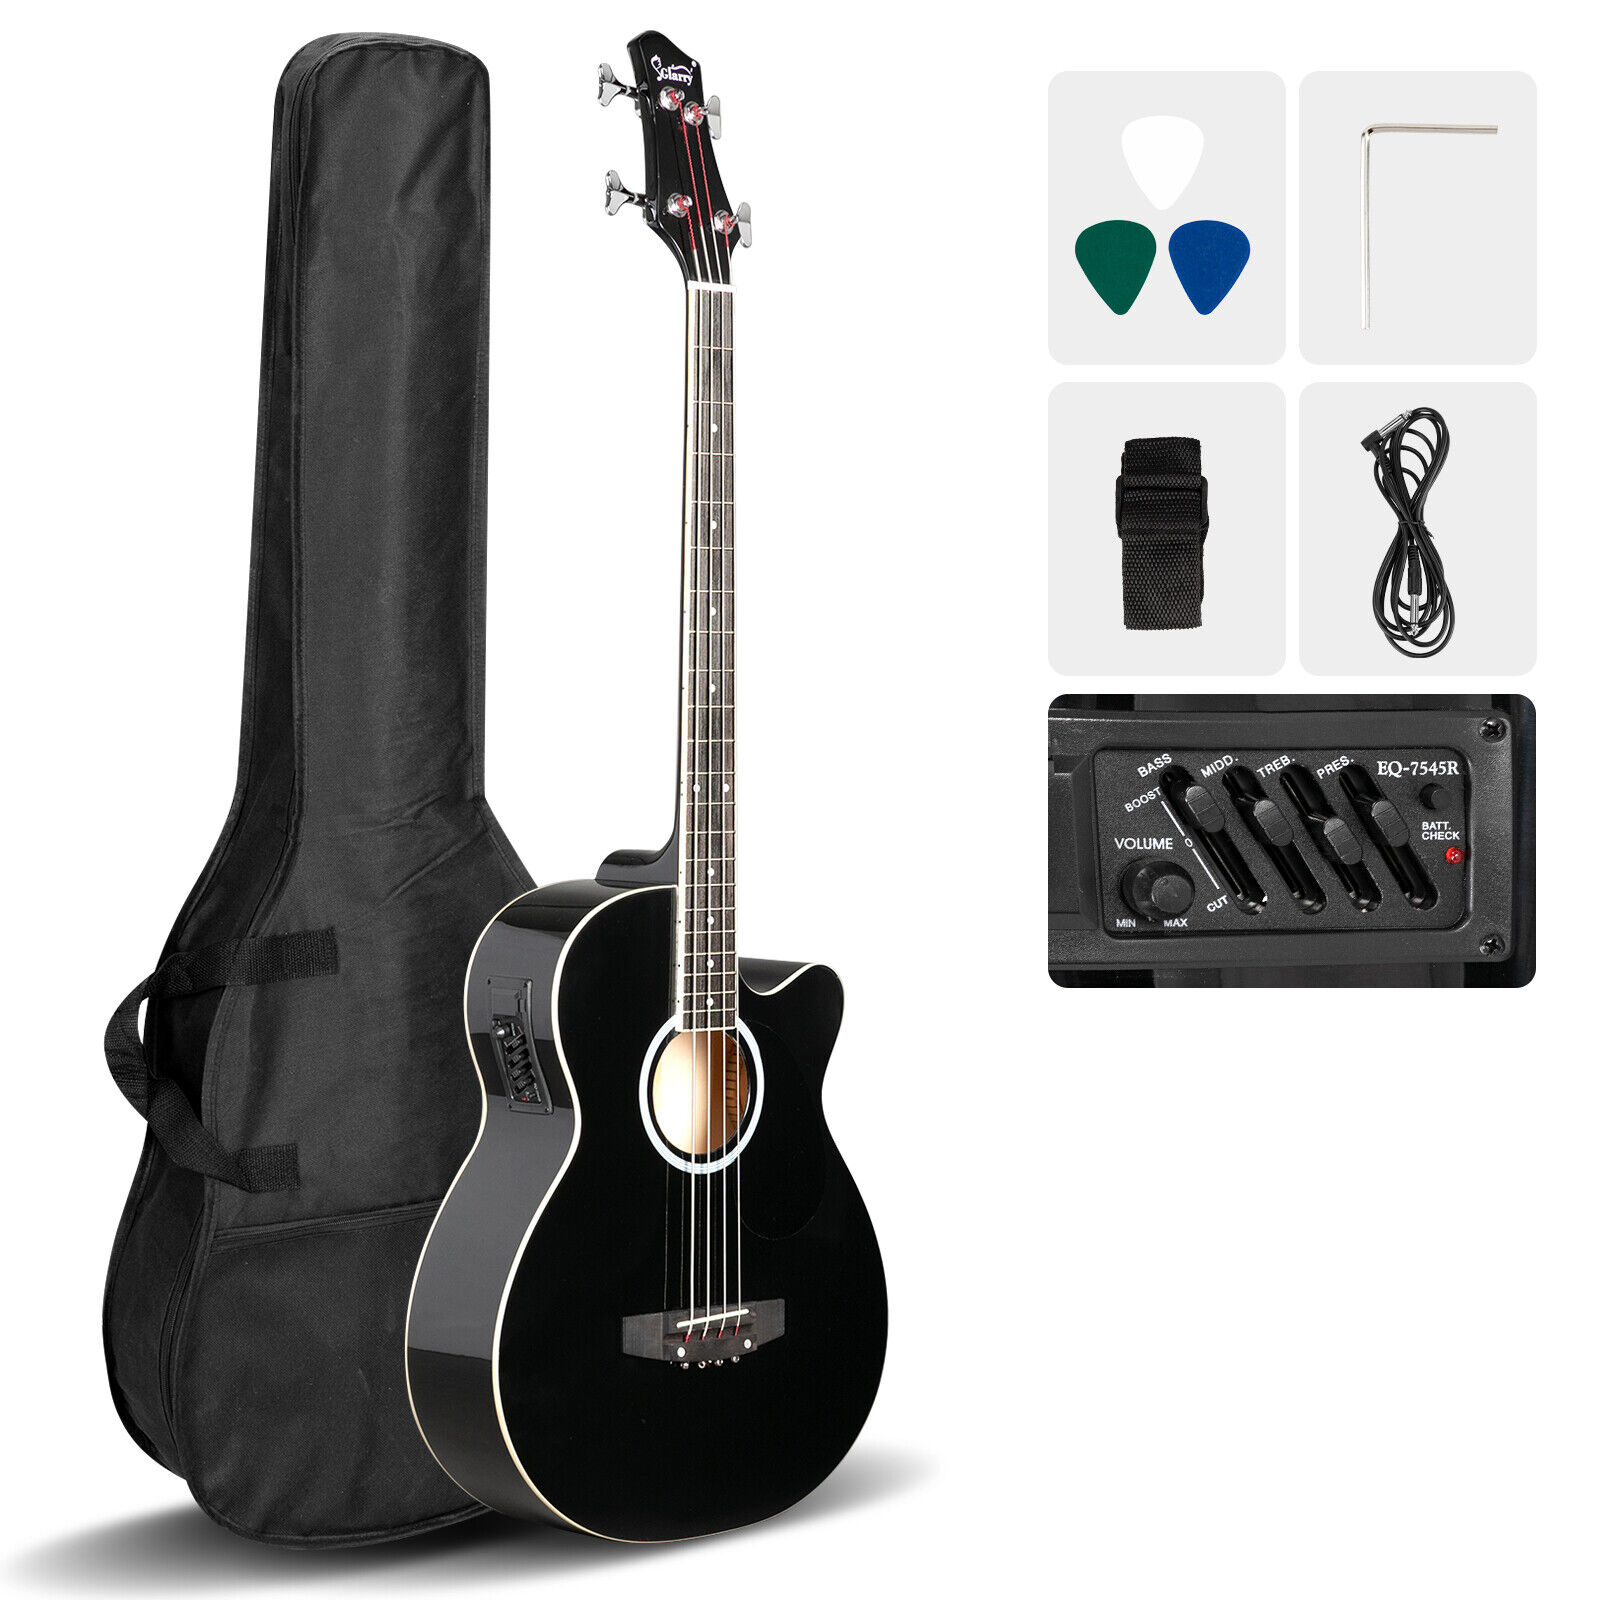 Glarry GMB101 4 string Electric Acoustic Bass Guitar 4-Band Equalizer EQ-7545R – Black 2